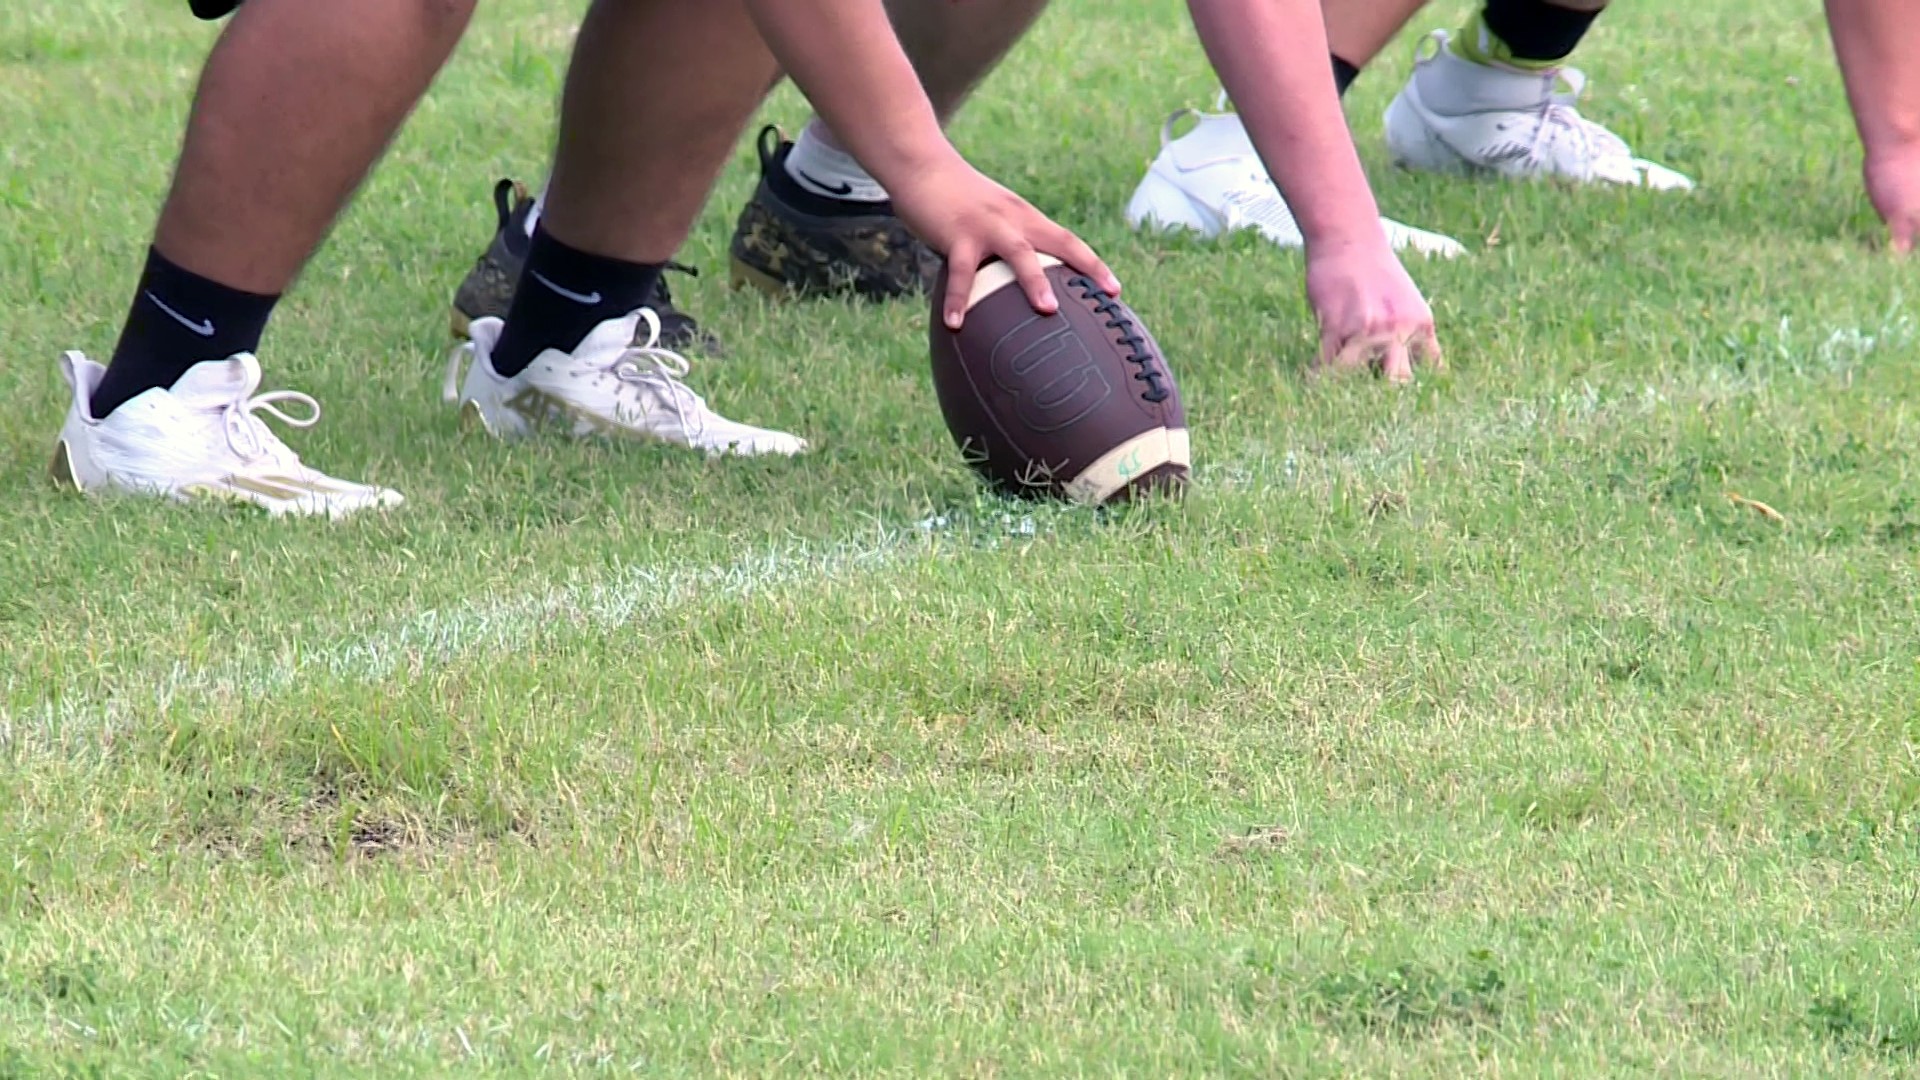 Monday marked the first official day for high schools in Arkansas. To combat the extreme heat many teams practice early in the morning.